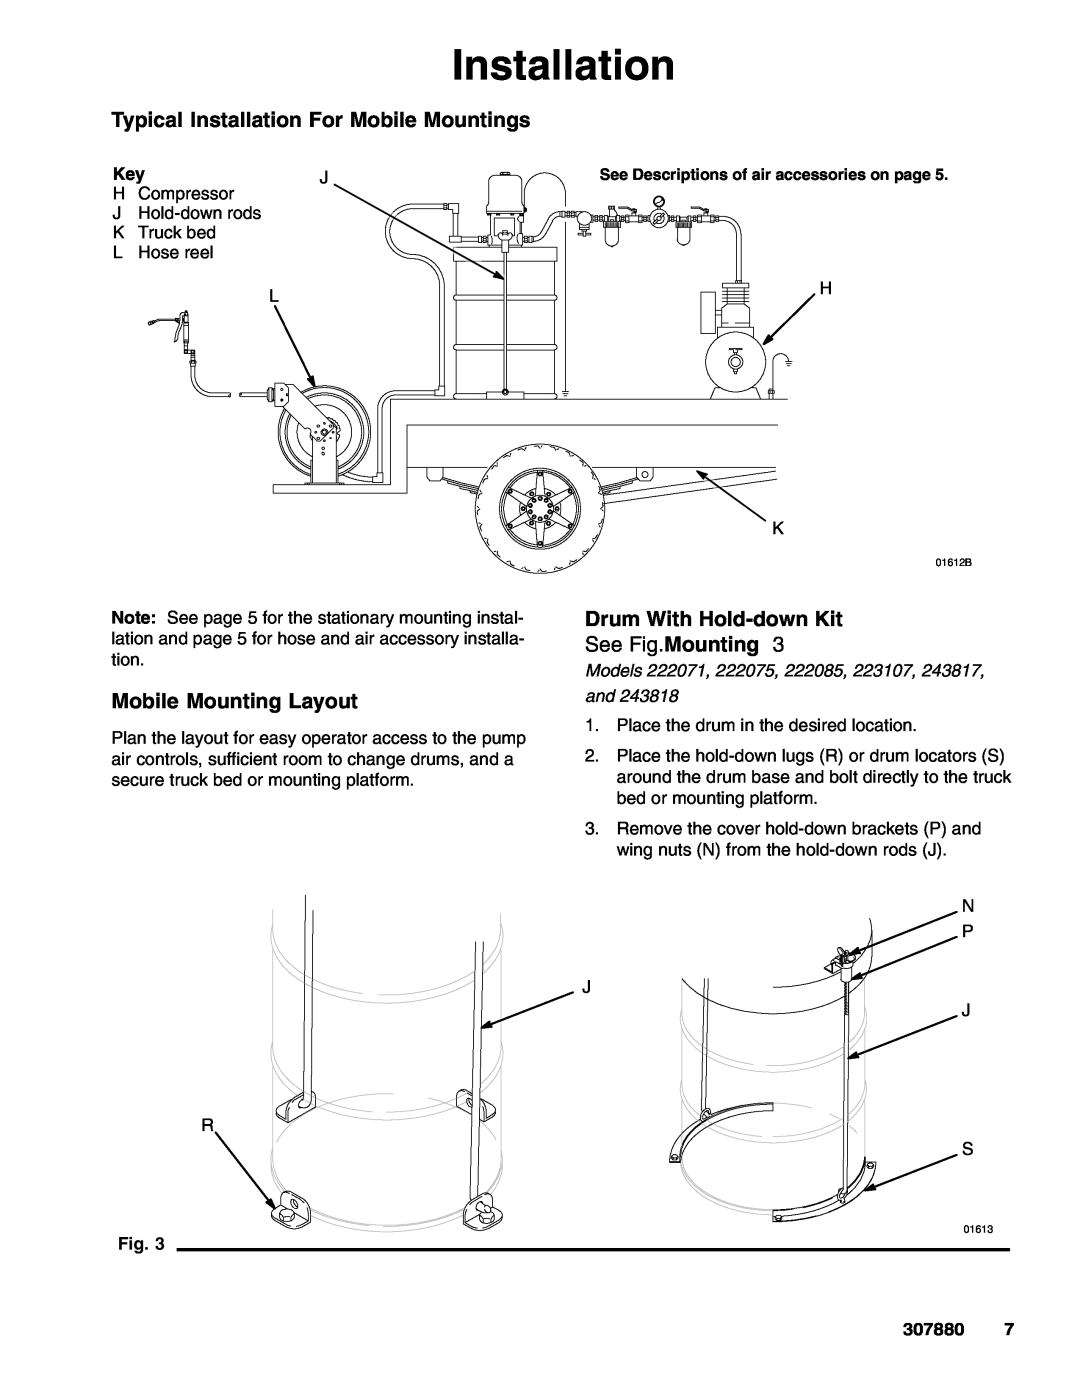 Graco 300, 425 Typical Installation For Mobile Mountings, Mobile Mounting Layout, Drum With Hold-downKit, See Fig.Mounting 